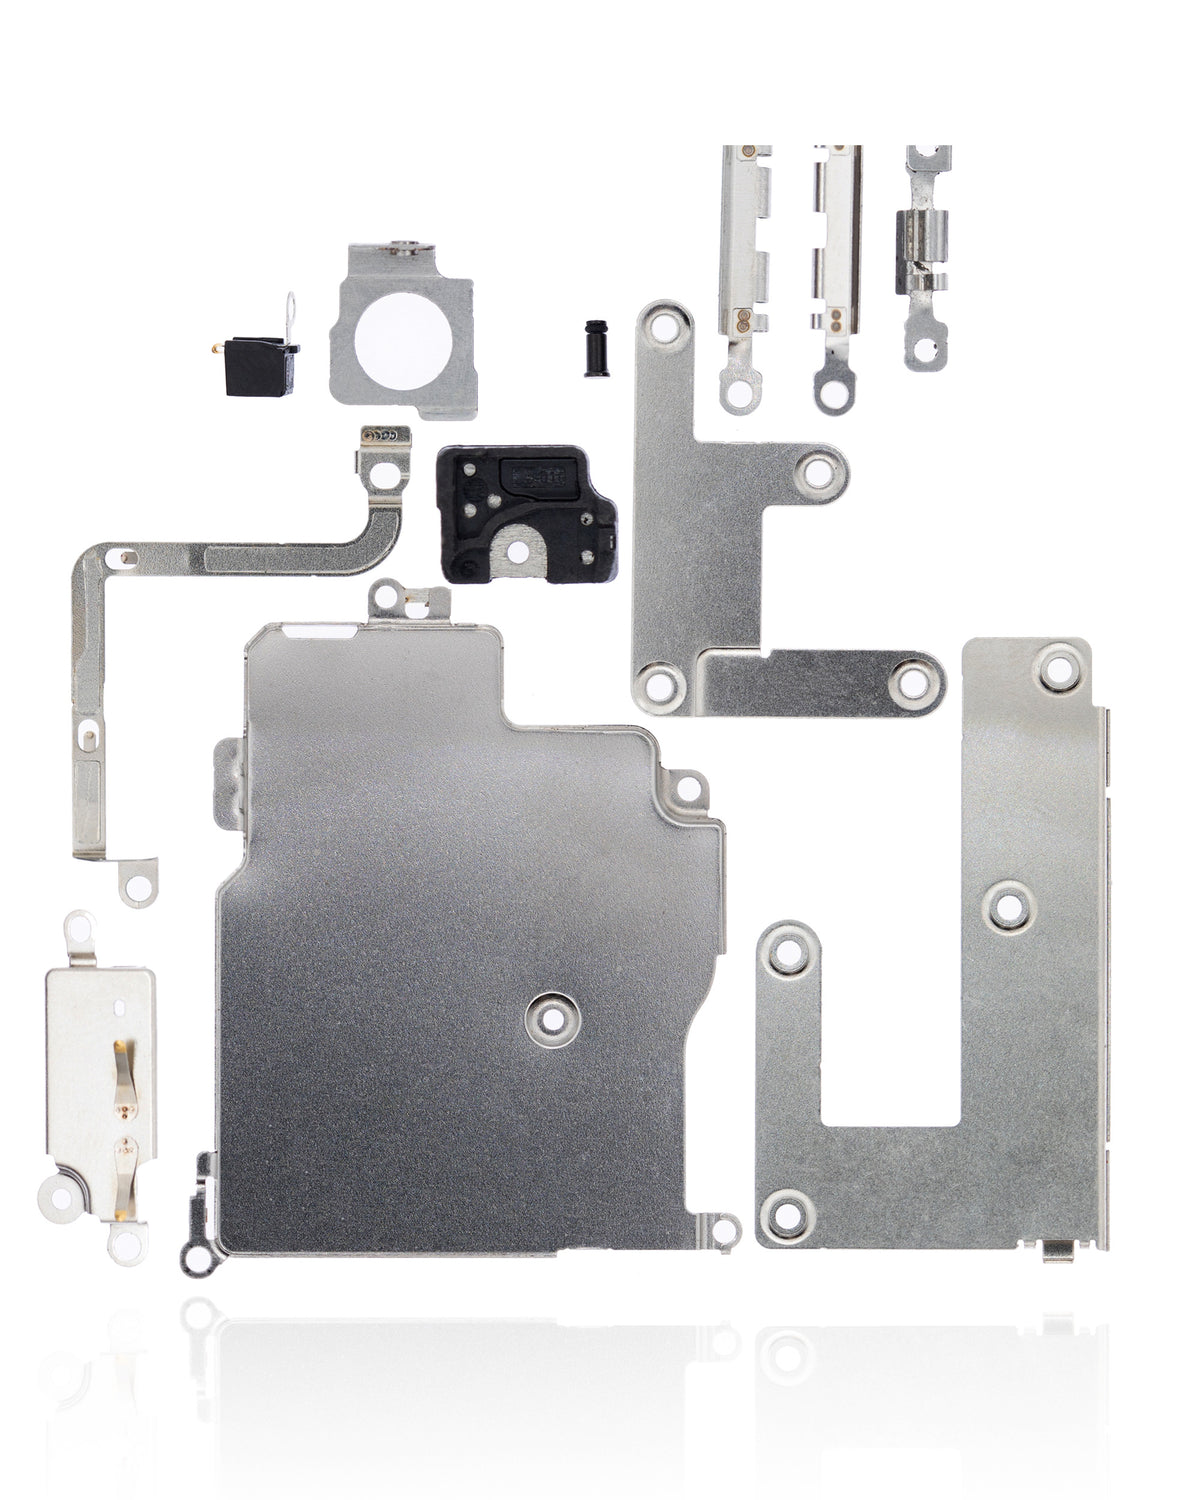 FULL SET SMALL METAL BRACKET FOR IPHONE 12 PRO MAX